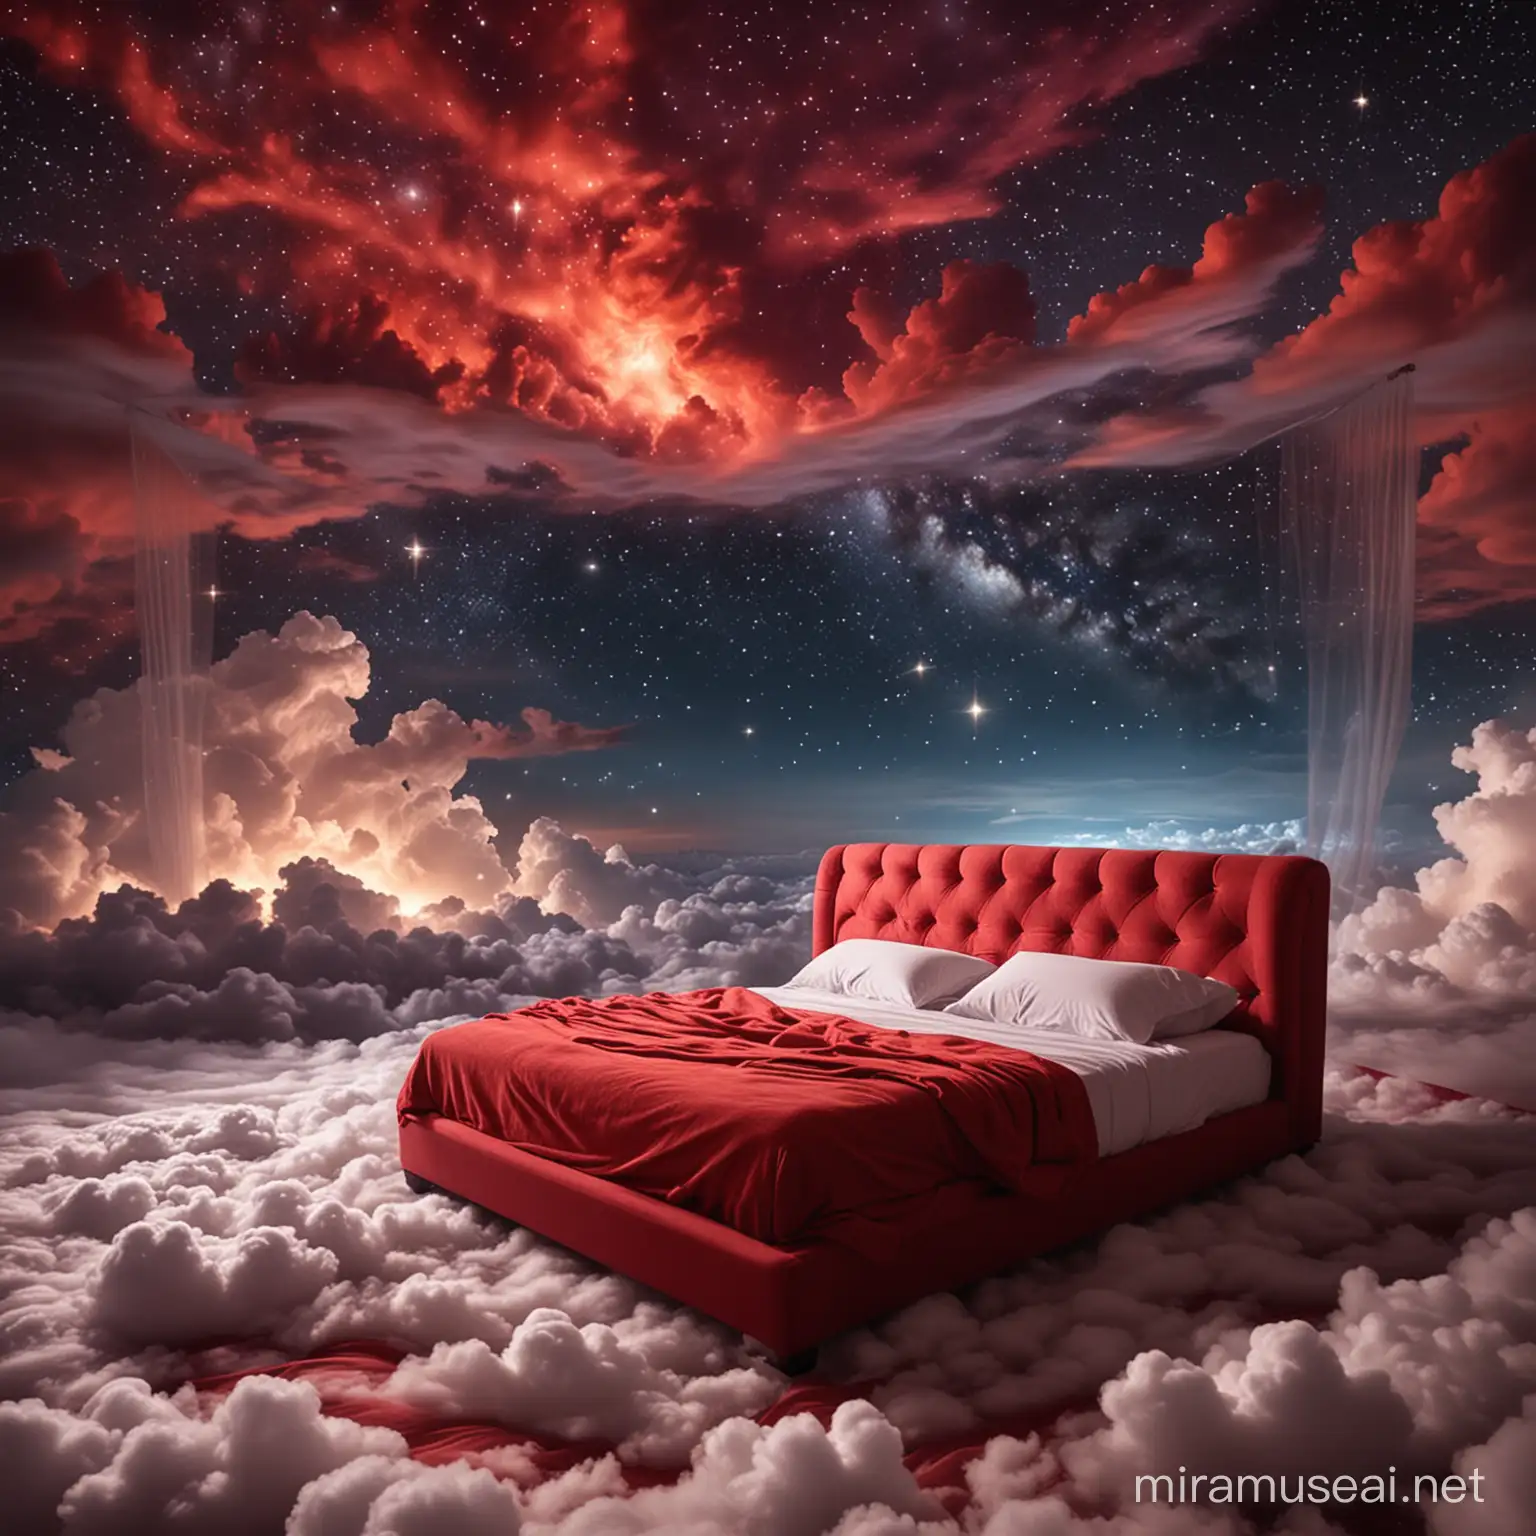 A beautiful, comfortable red bed covered all over with clouds , among the stars in the sky with clouds